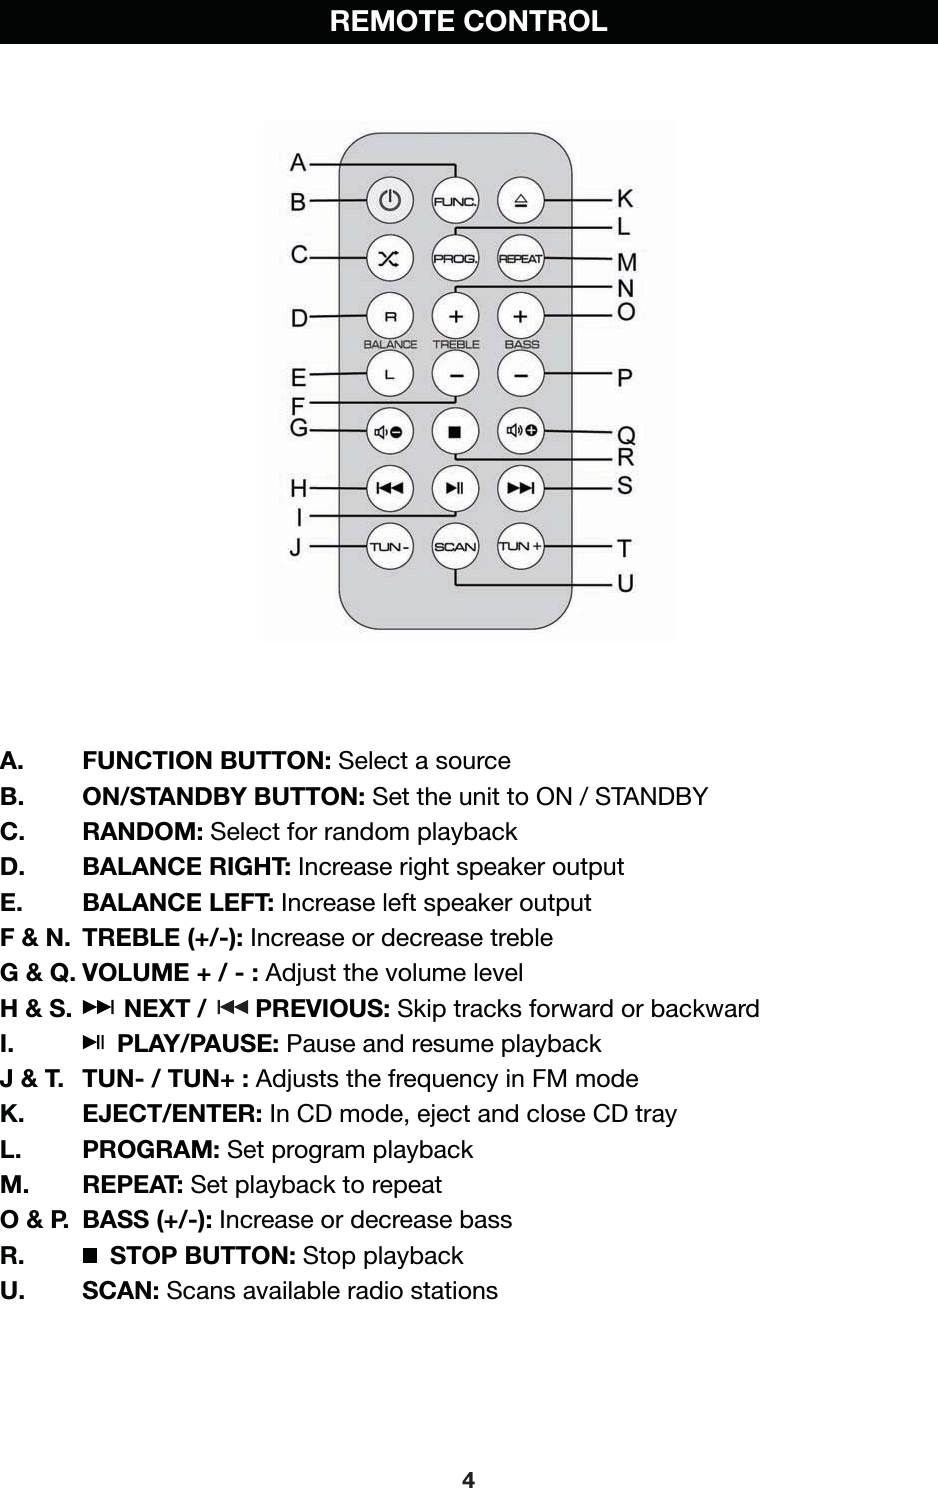 REMOTE CONTROLA. FUNCTION BUTTON: Select a sourceB. ON/STANDBY BUTTON: Set the unit to ON / STANDBYC. RANDOM: Select for random playbackD. BALANCE RIGHT: Increase right speaker output E. BALANCE LEFT: Increase left speaker outputF &amp; N.  TREBLE (+/-): Increase or decrease trebleG &amp; Q. VOLUME + / - : Adjust the v olume levelH &amp; S.       NEXT /       PREVIOUS: Skip tracks forward or backwardI.       PLAY/PAUSE: Pause and r esume p laybackJ &amp; T.  TUN- / TUN+ : Adjusts the frequency in FM m odeK. EJECT/ENTER: In CD m ode, eject and c lose CD trayL. PROGRAM: Set program playbackM. REPEAT: Set playback to r epeatO &amp; P.  BASS (+/-): Increase or decrease bassR.      STOP BUTTON: Stop playbackU.  SCAN: Scans available radio stations4